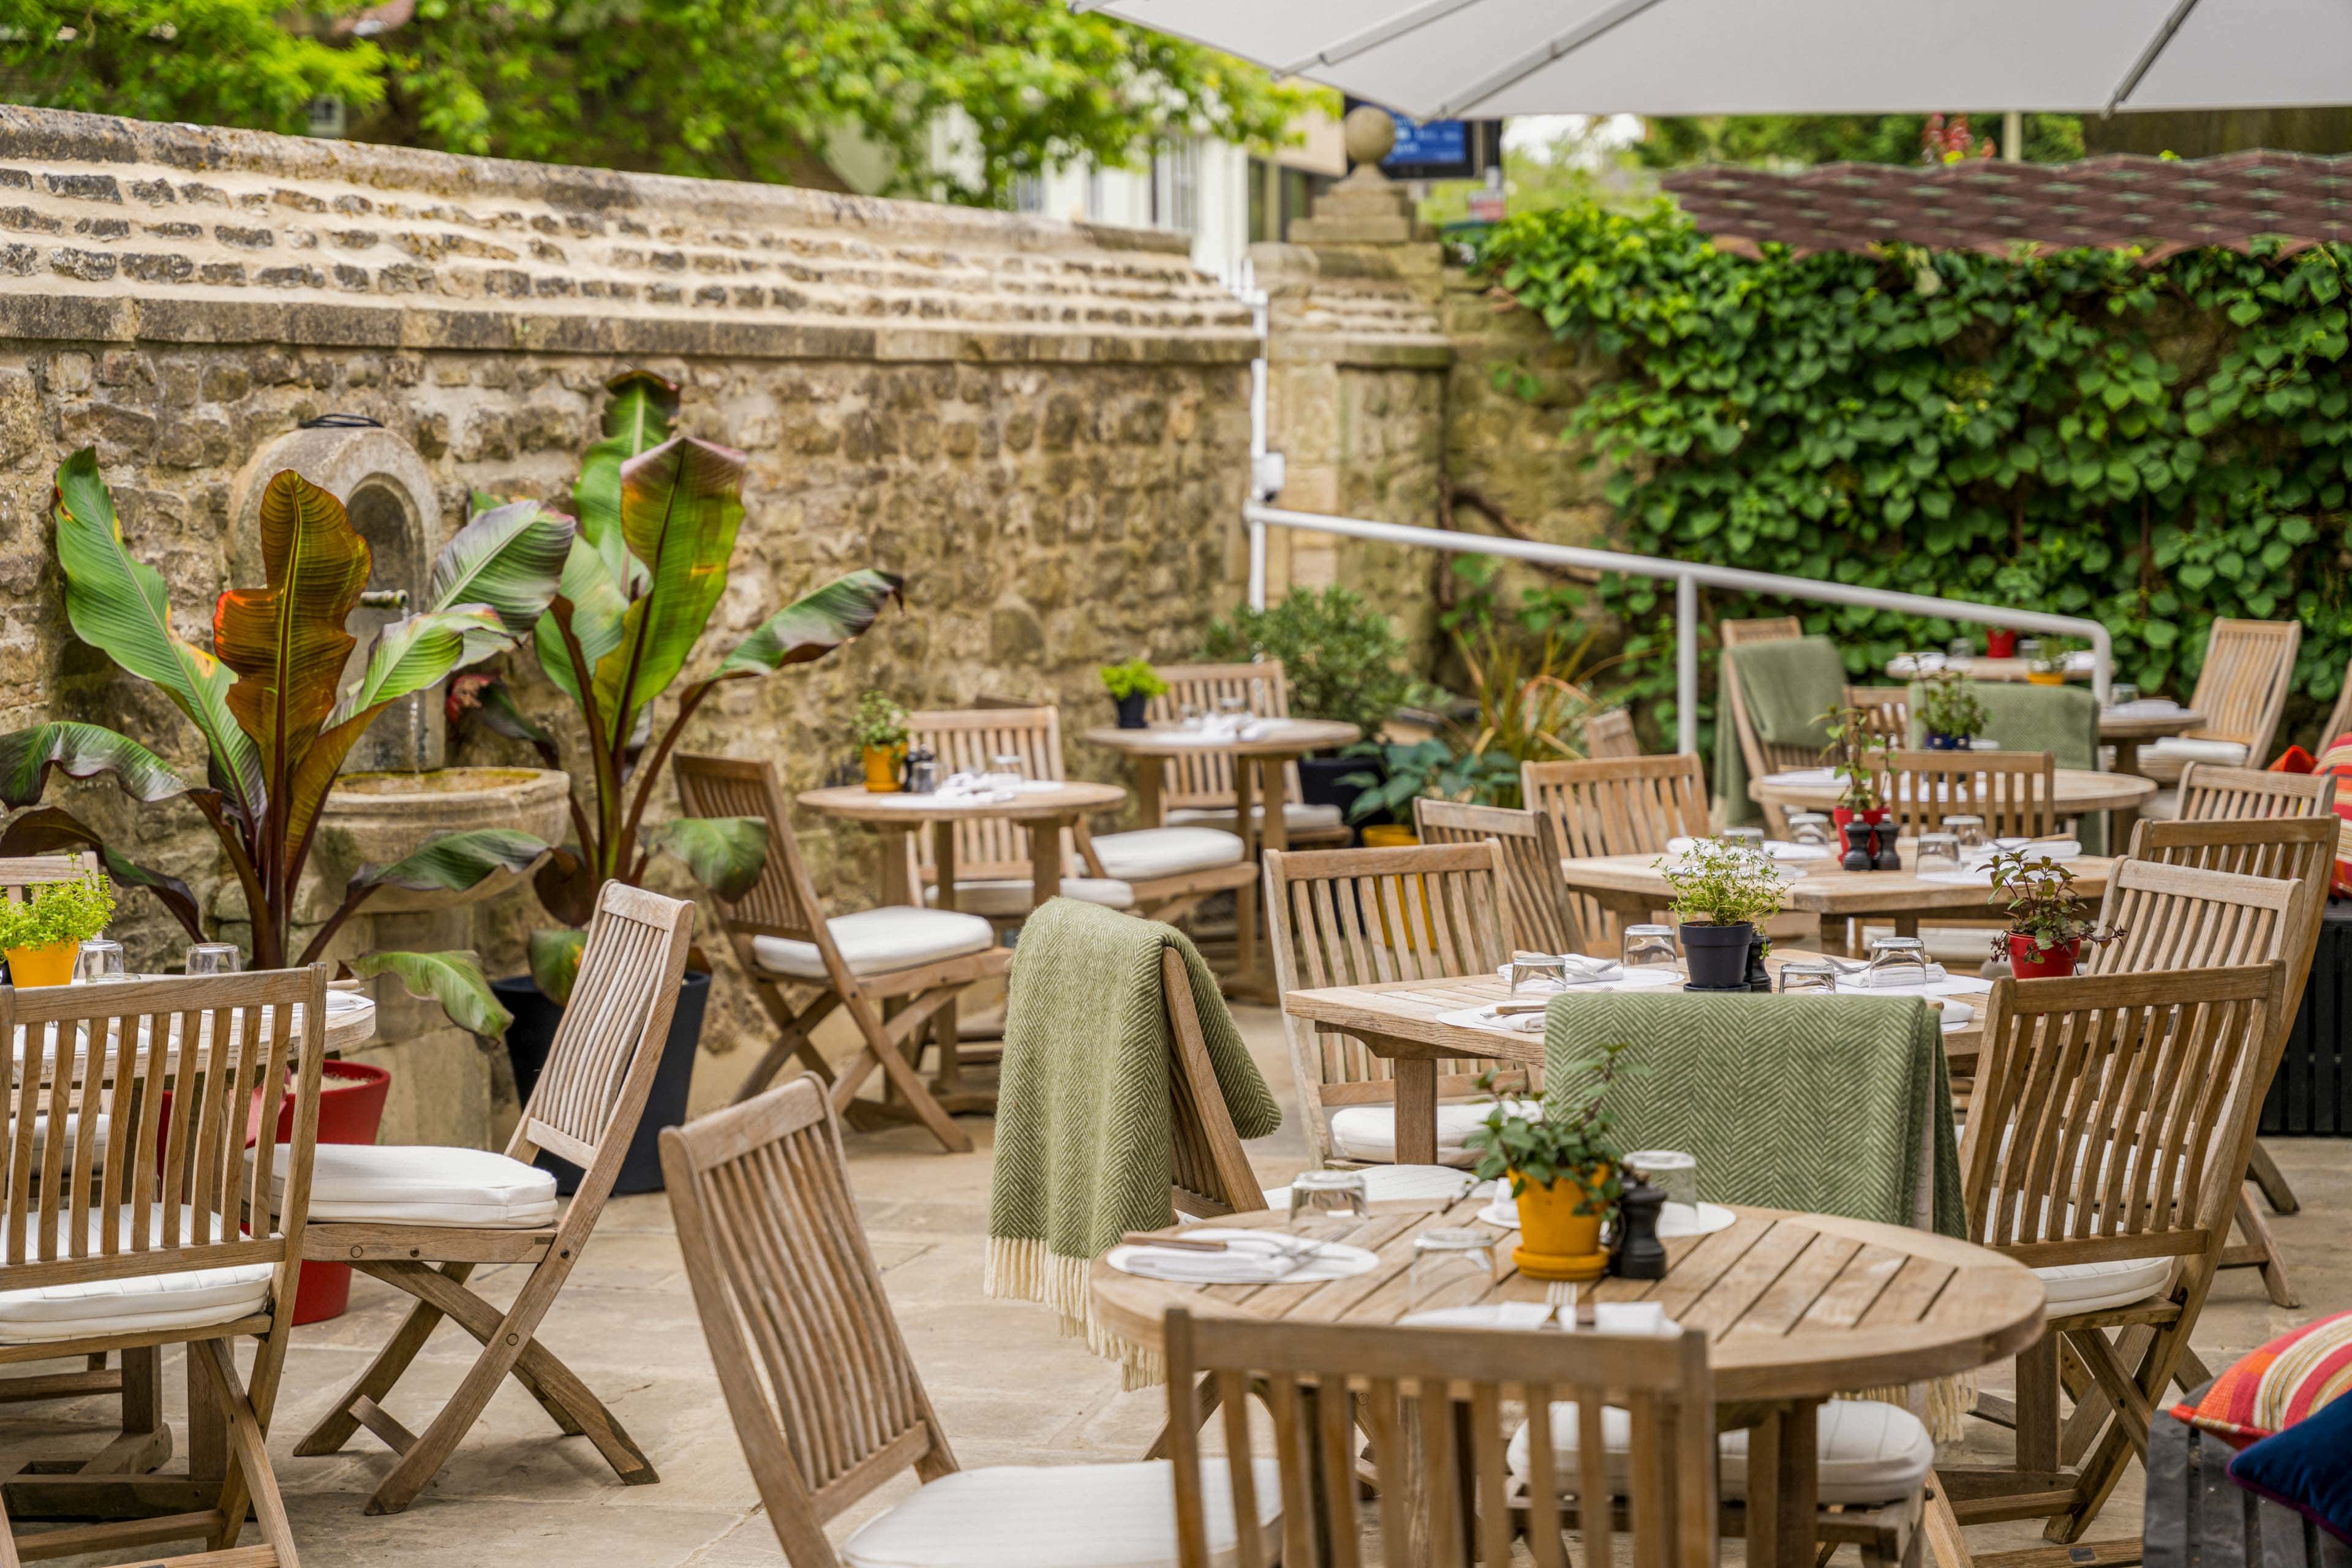 A7R03857 - 2024 - Parsonage Grill - Oxford - High Res - Outdoor Terrace Seating - Web Hero